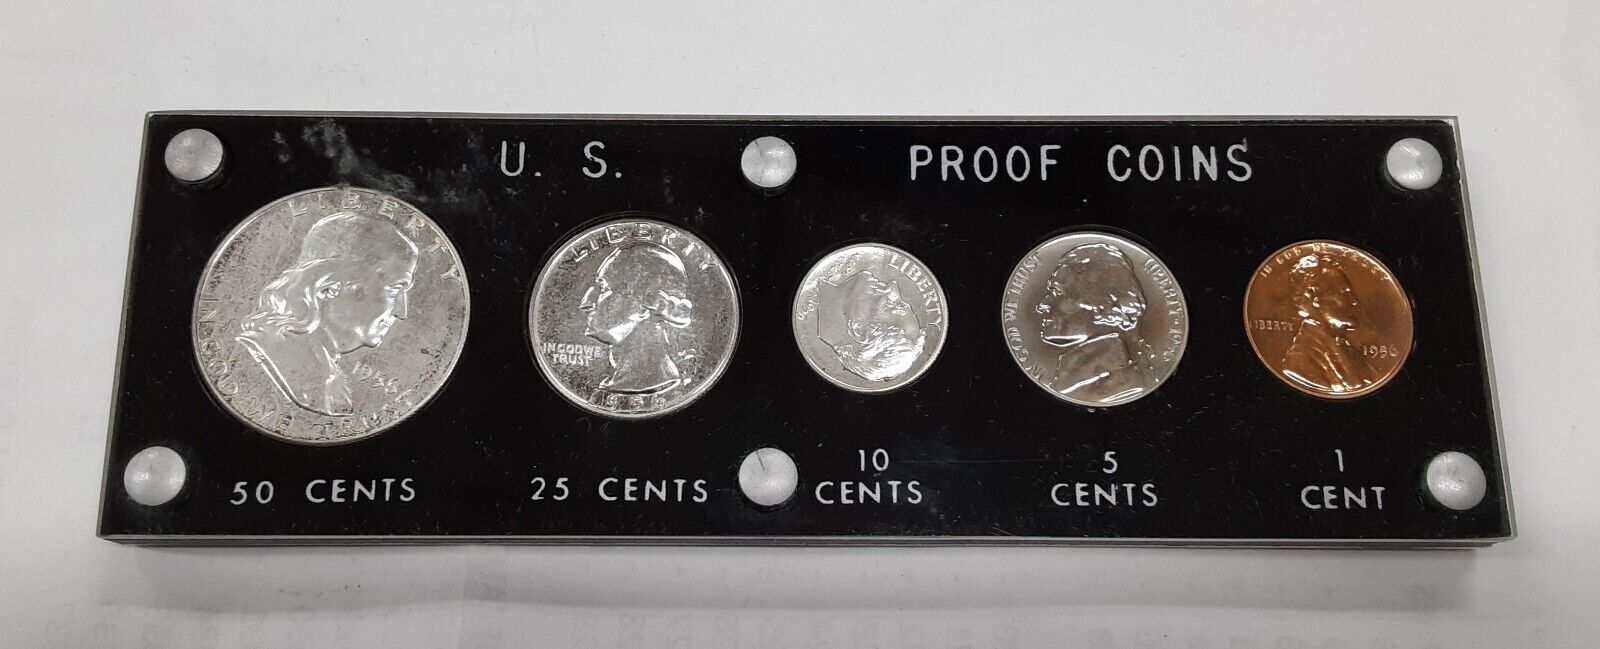 1956 US Silver Proof Set - 5 Proof Coins in Black Acrylic Holder  (B)